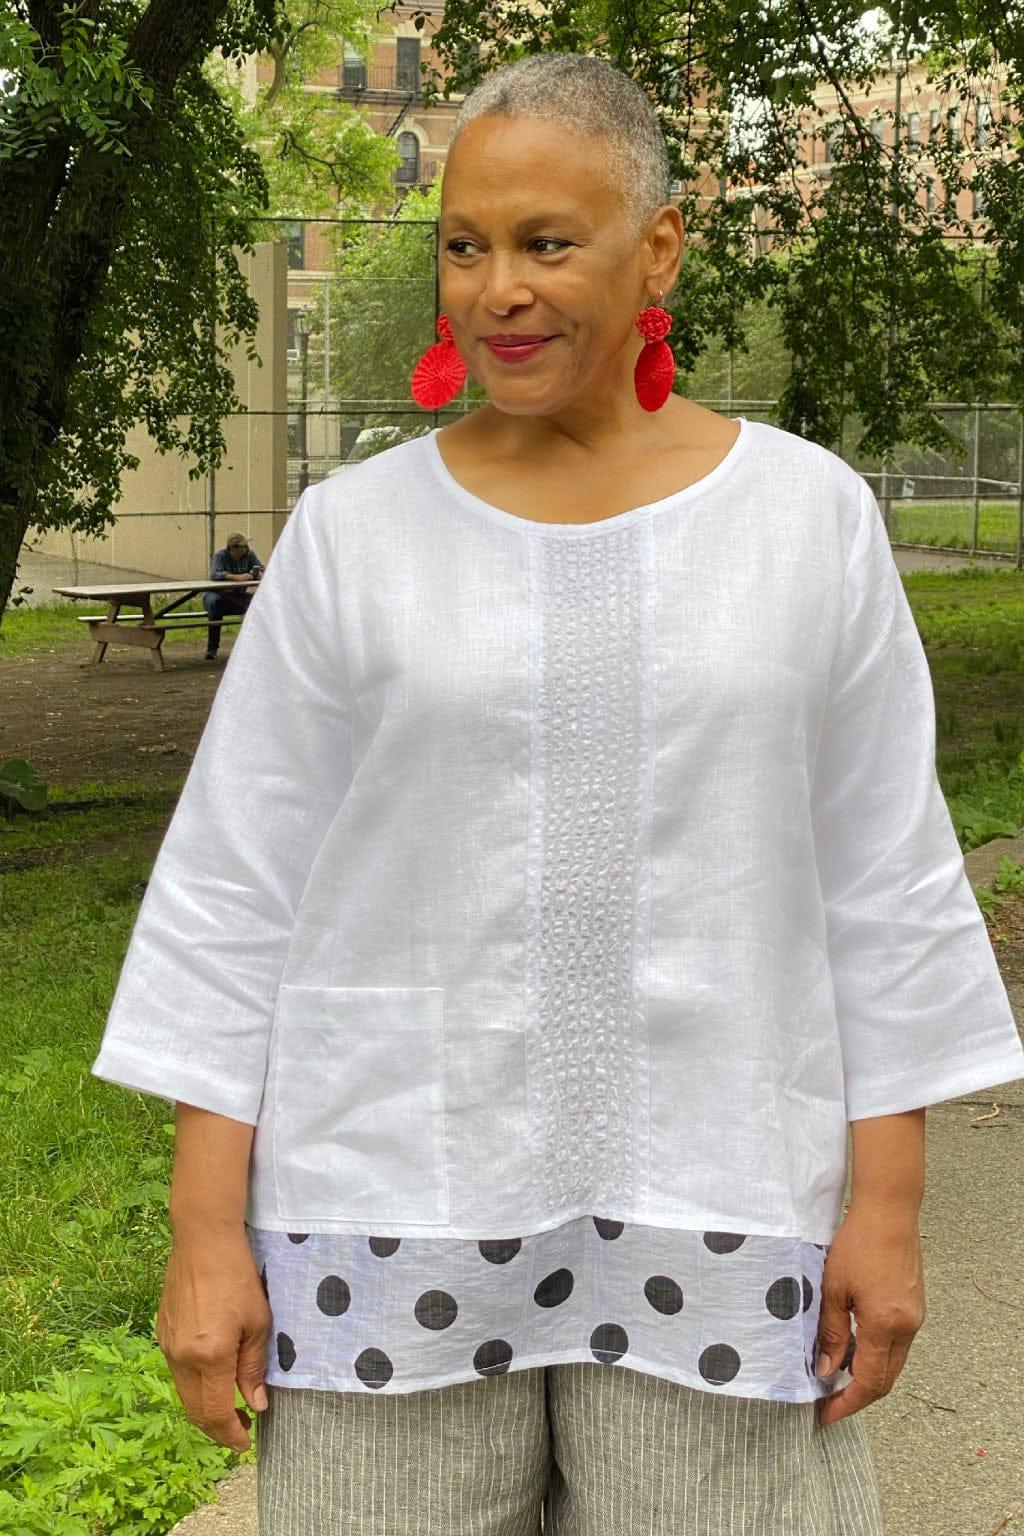 Woman with short cropped grey hair wearing a white linen top with a polka dot hem. She is wearing red woven earrings.